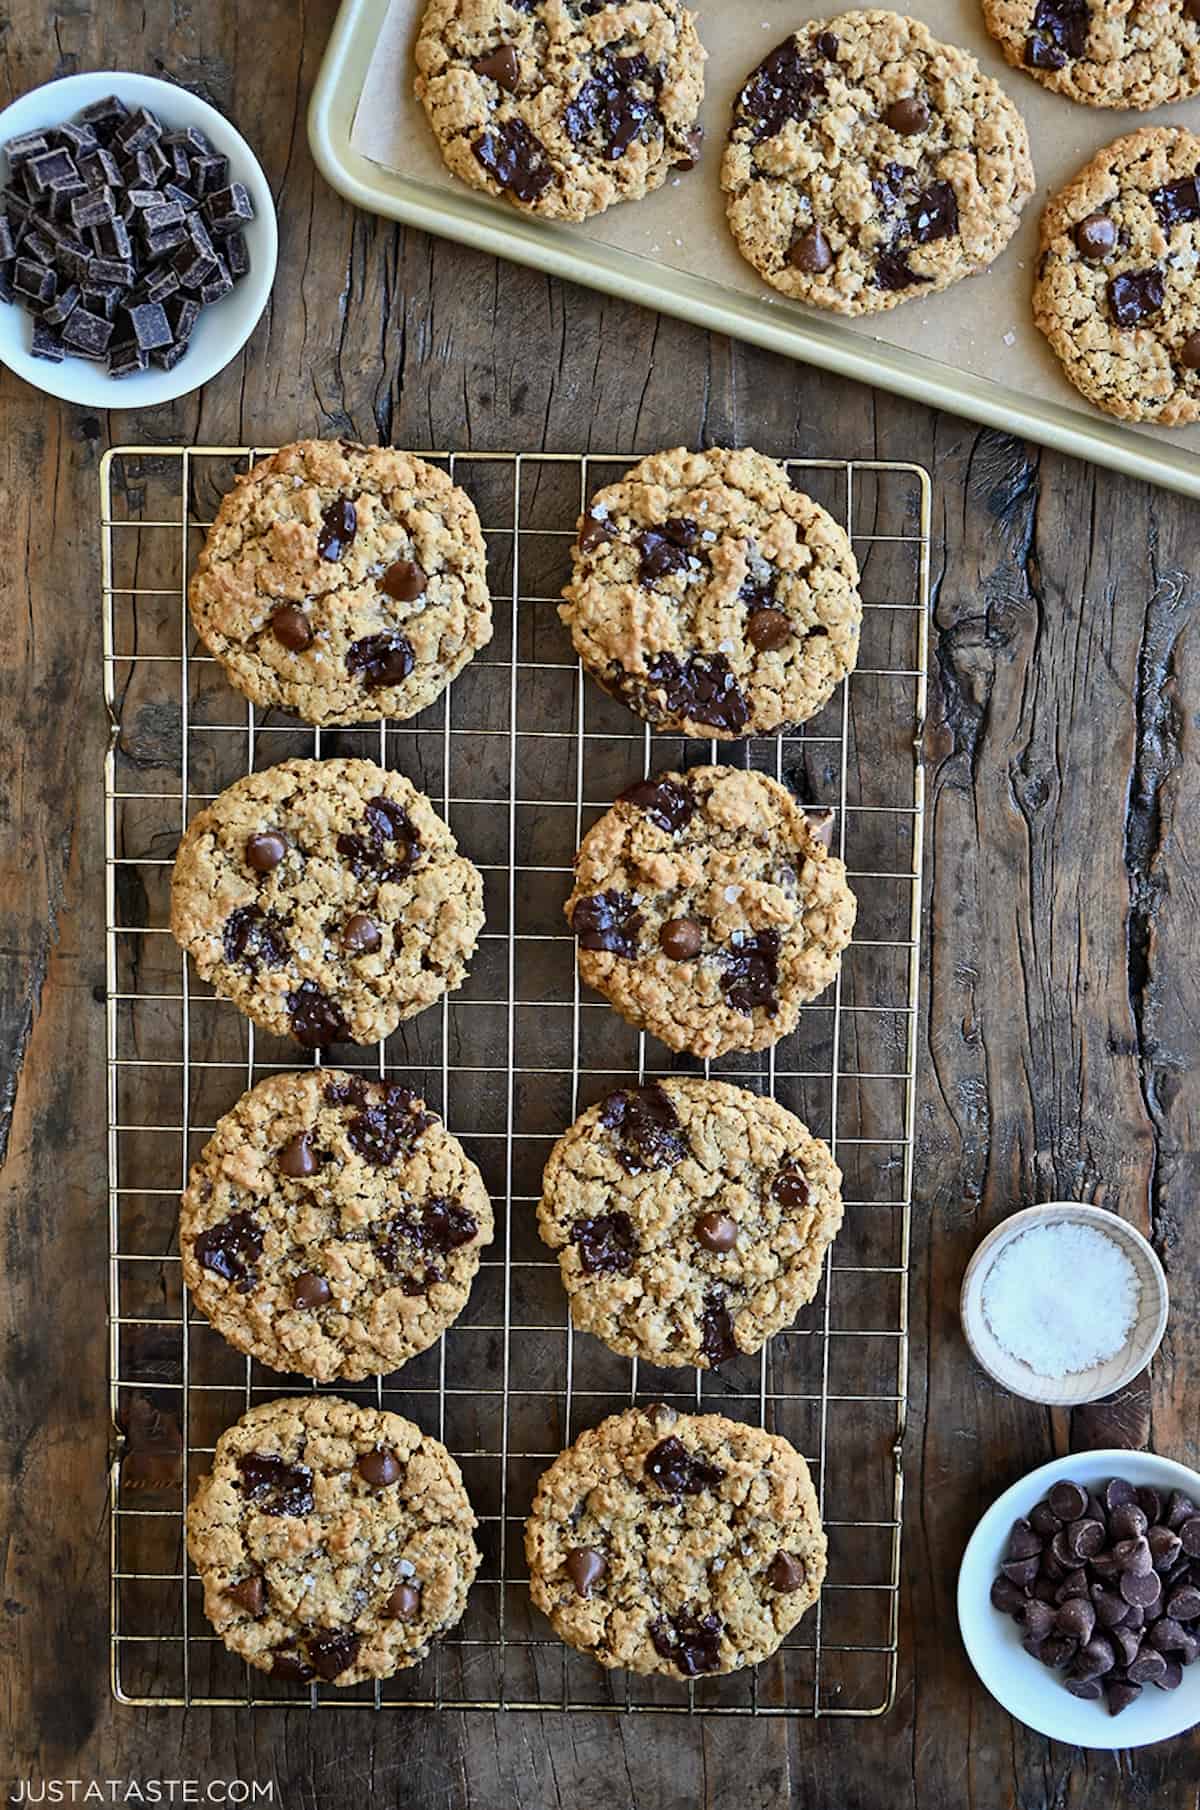 Flourless oatmeal cookies studded with chocolate chips and chunks on a wire cooling rack next to a small bowl containing large-flake sea salt.